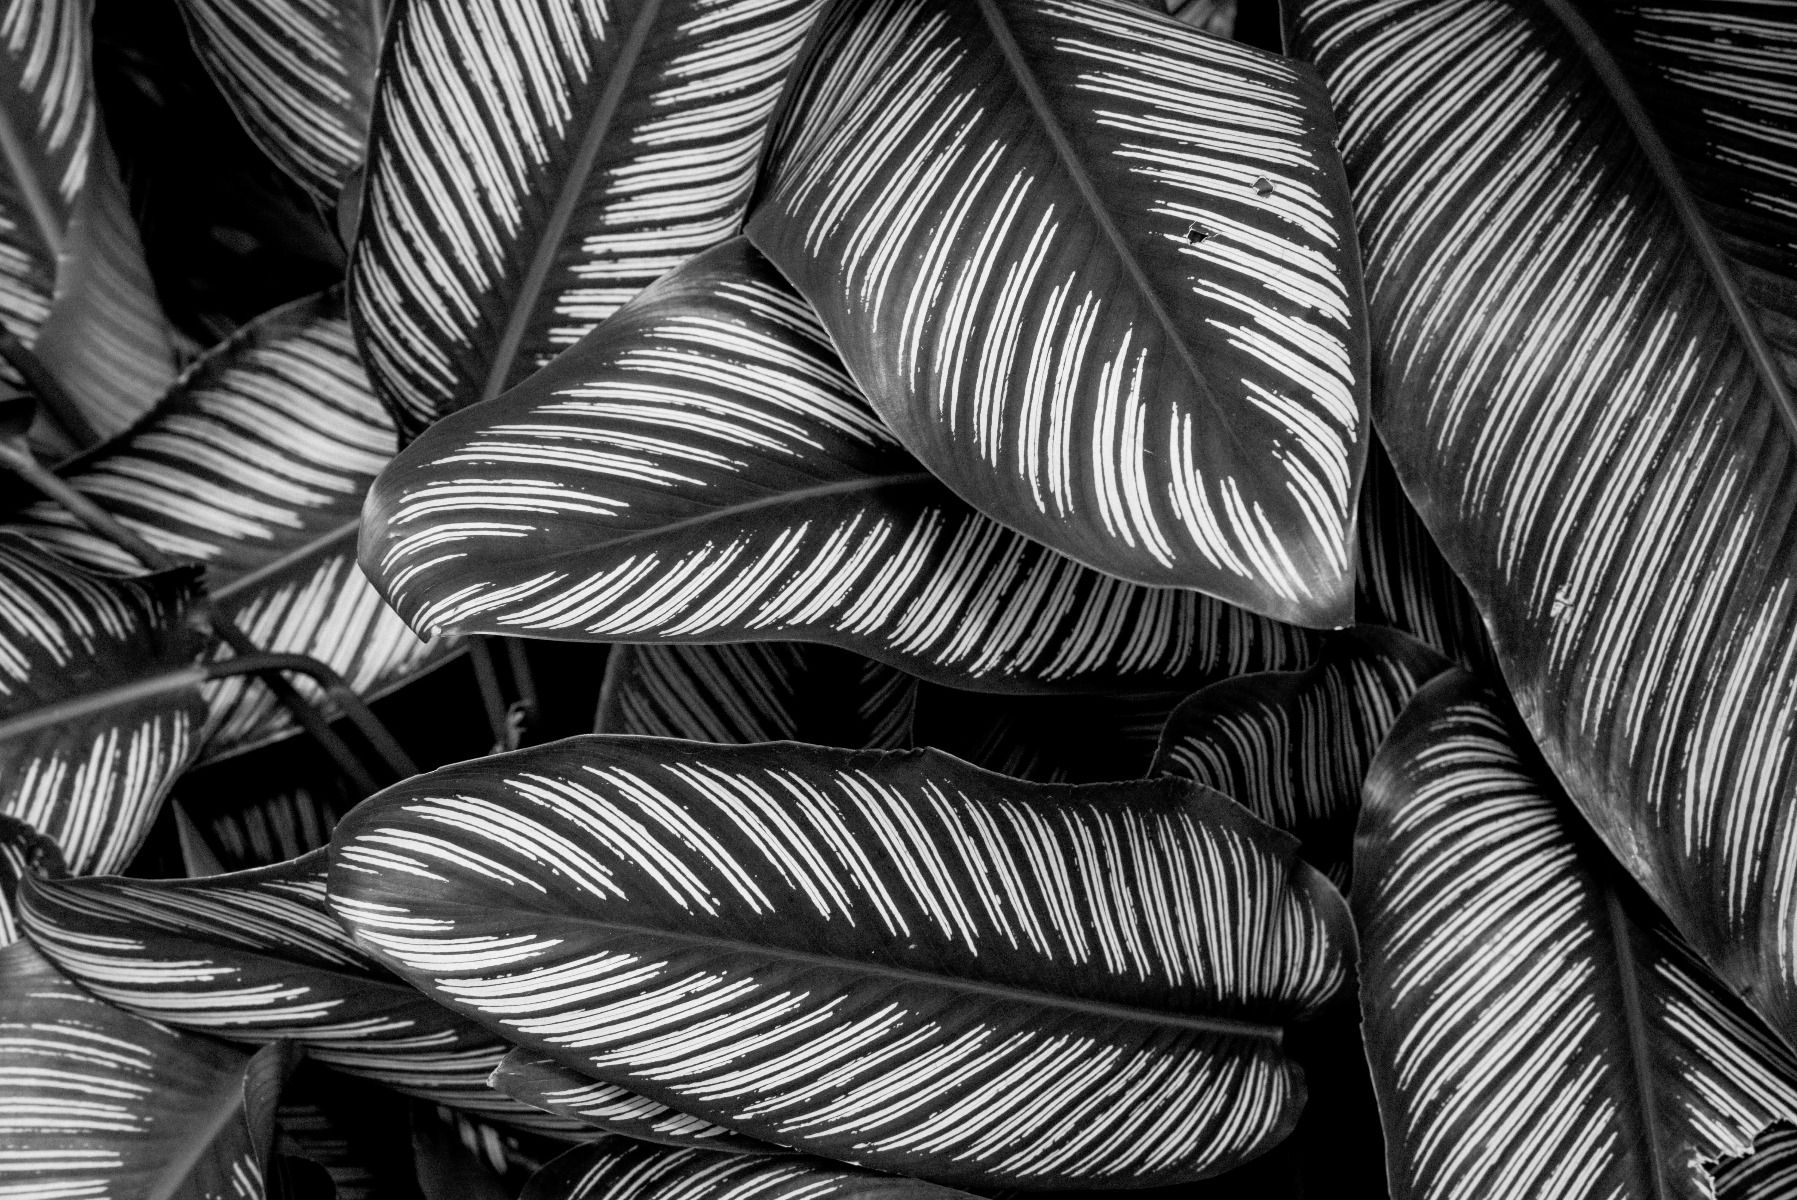 Wallpaper Mural - Black and white palm leaves - Photo Wallpaper